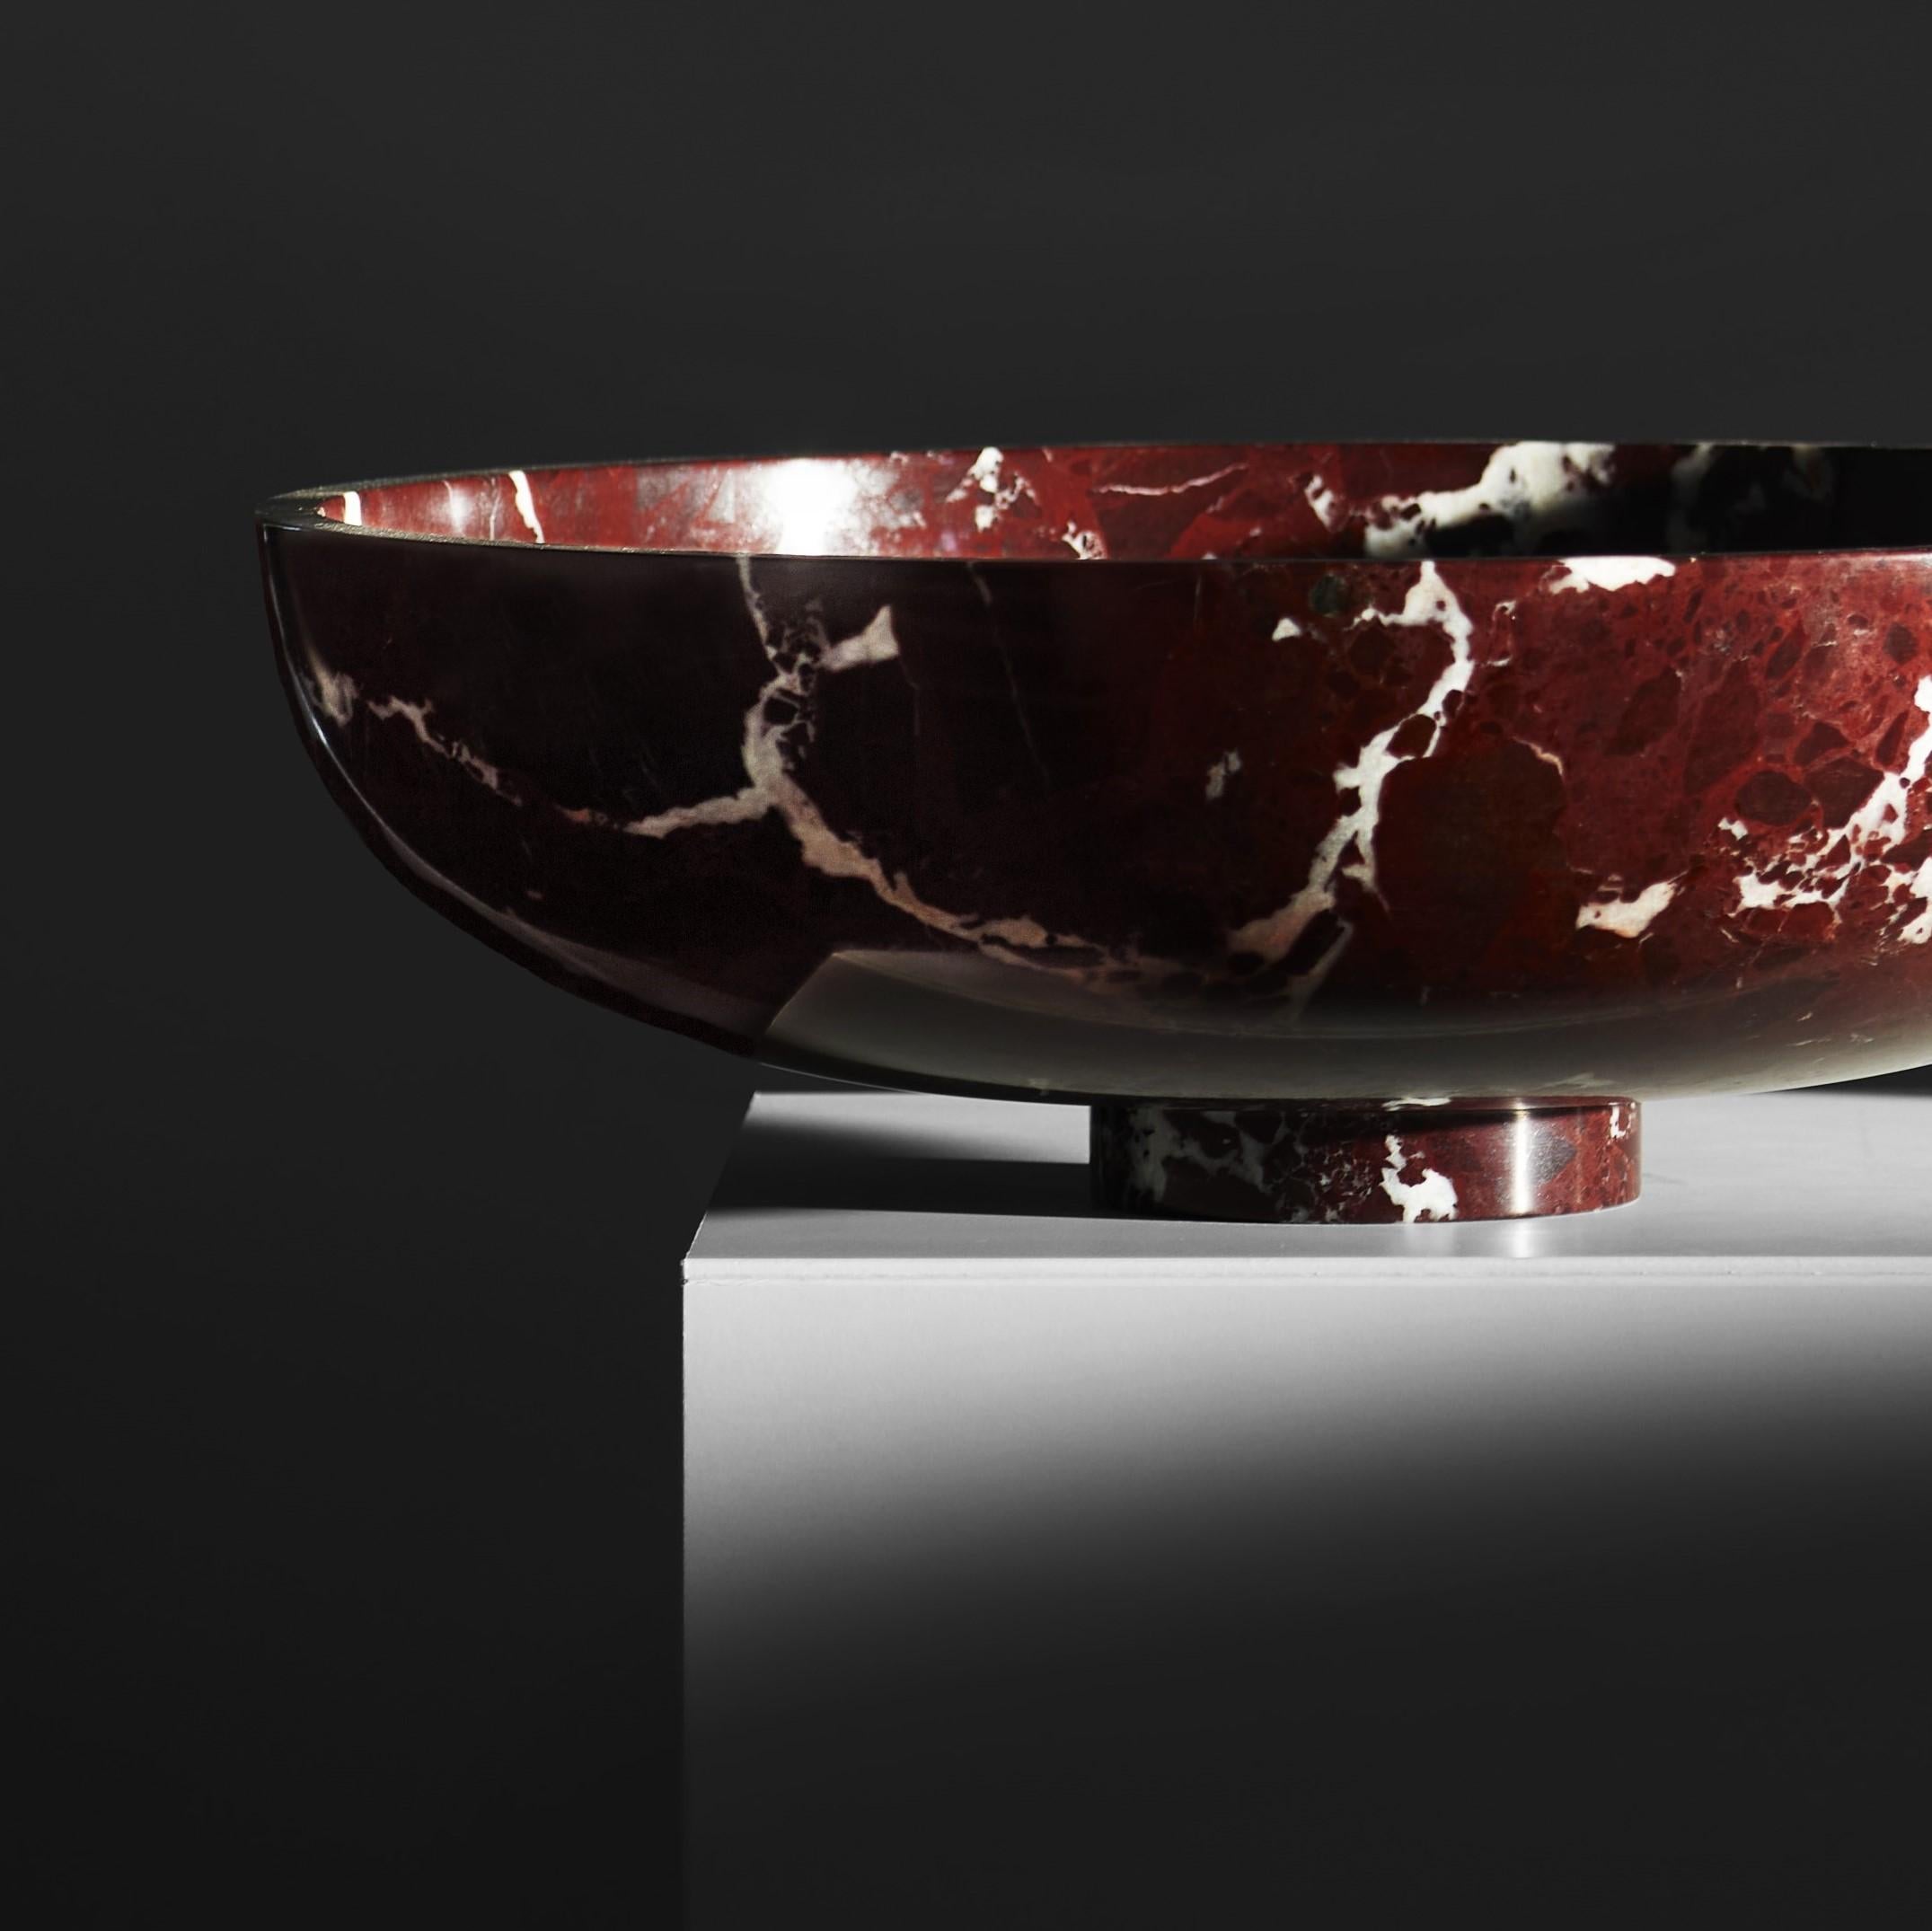 Set of 2 twosidestory bowl XL by Lisette Rützou
Dimensions: D 40 cm
Materials: Levanto Bordeaux Marble

 Lisette Rützou’s design is motivated by an urge to articulate a story. Inspired by the beauty of materials, form and architecture, each